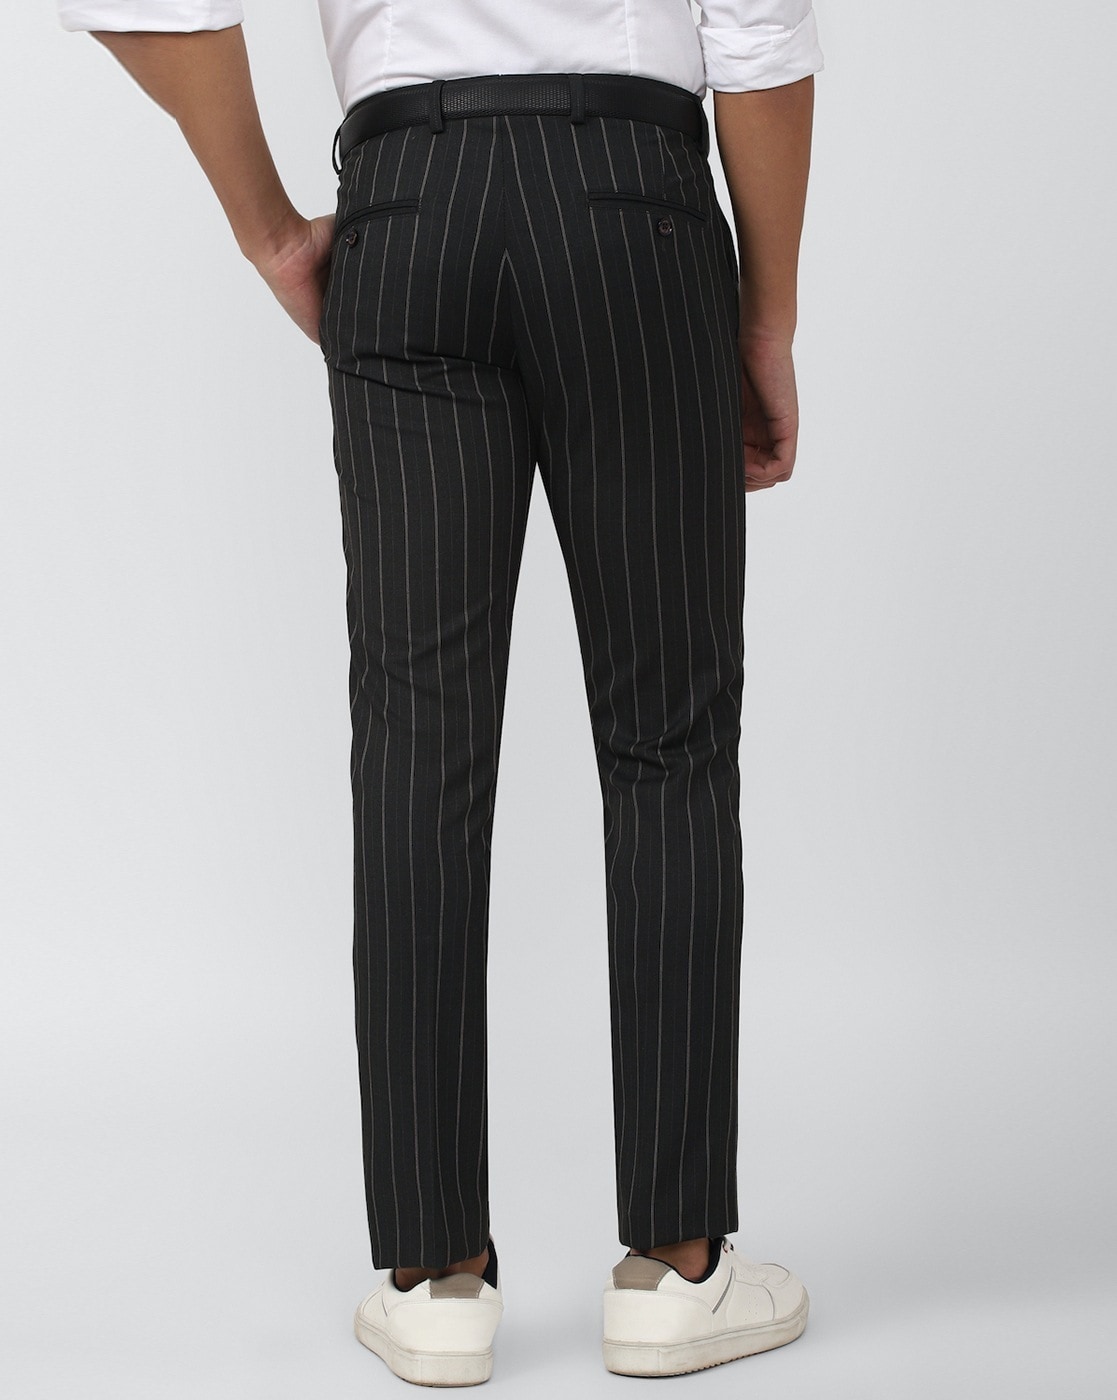 New Marshll Elegant men's pinstriped trousers: for sale at 29.99€ on  Mecshopping.it